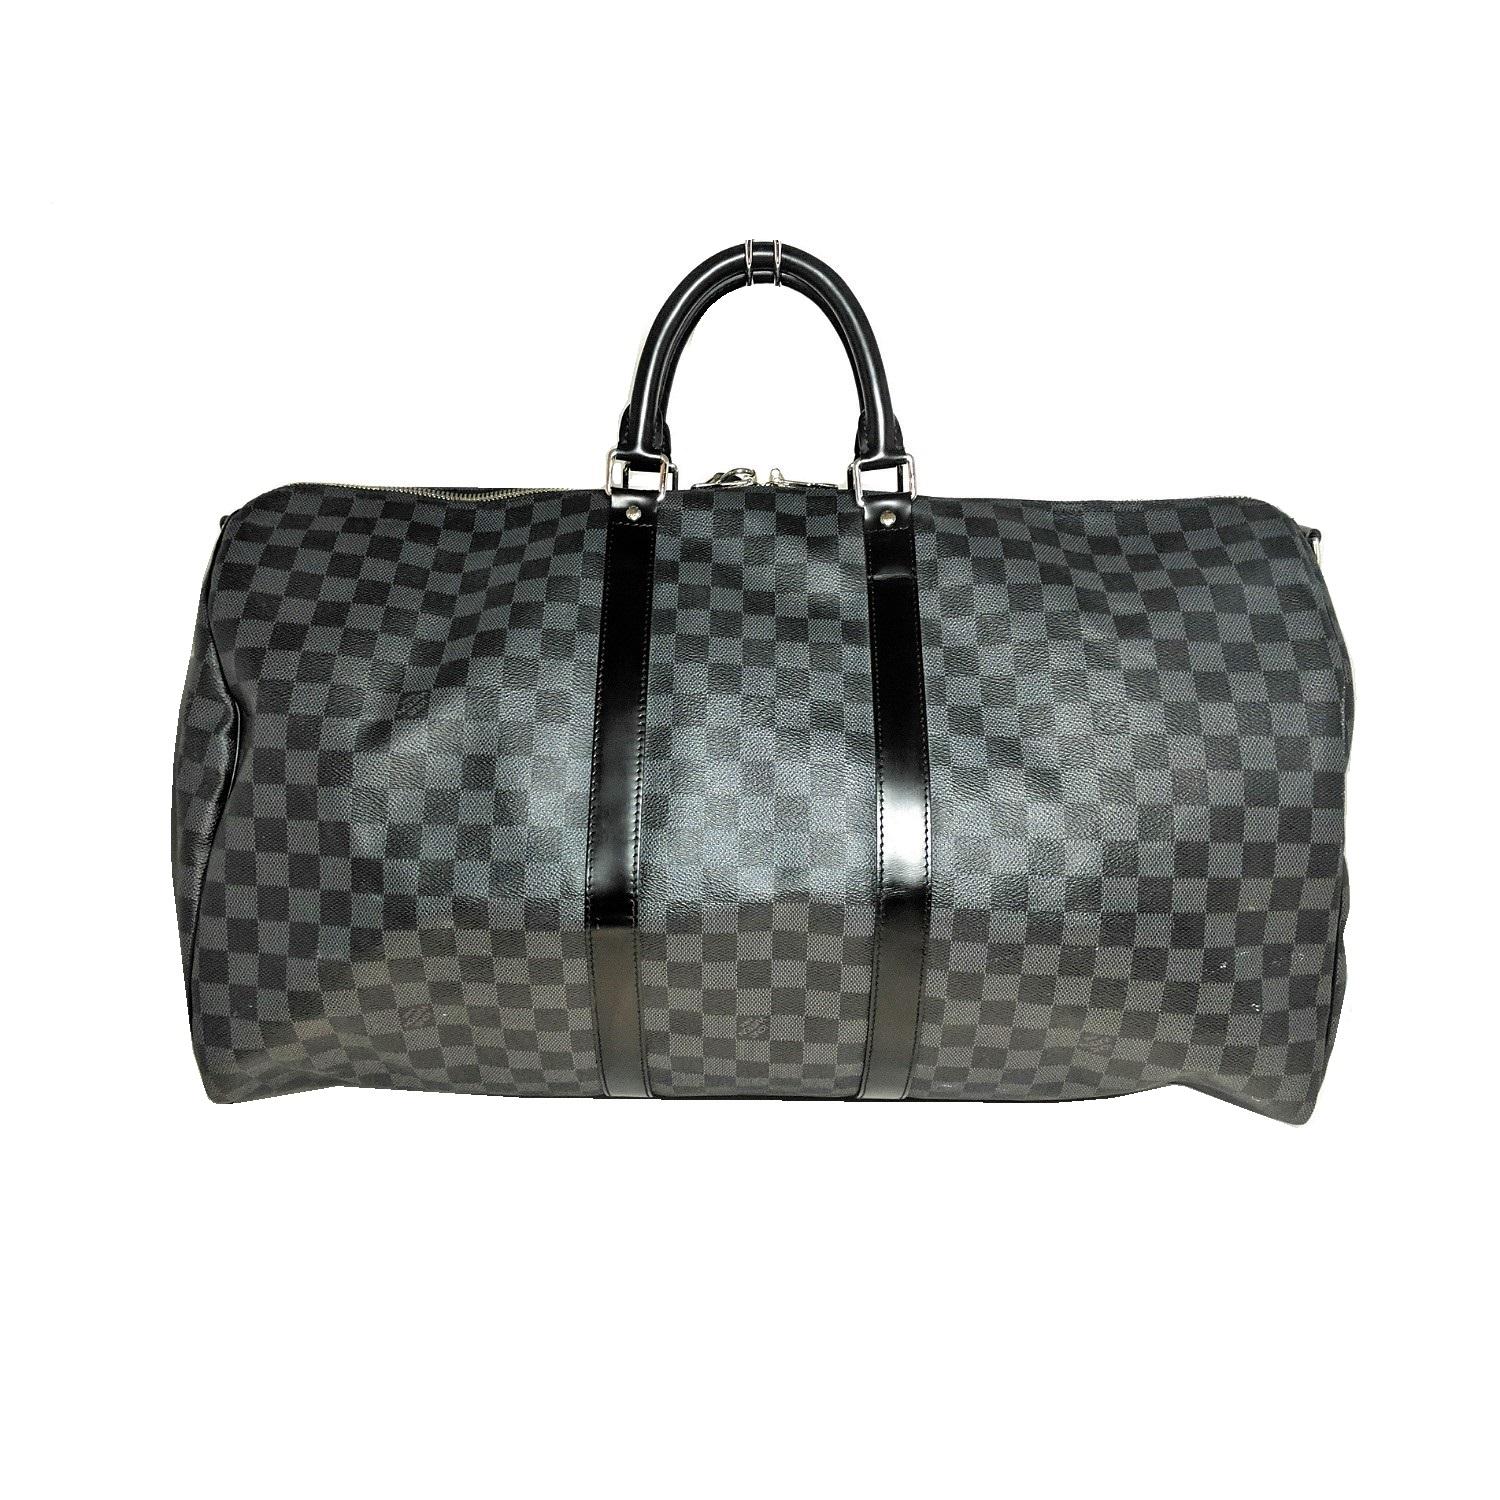 This urban travel bag in a revisited classic, Damier Graphite canvas, is not only stylish but also resistant and light. Hand held with a removable shoulder strap makes it extremely practical to use. Retail $2,100.

Designer: Louis Vuitton
Material: